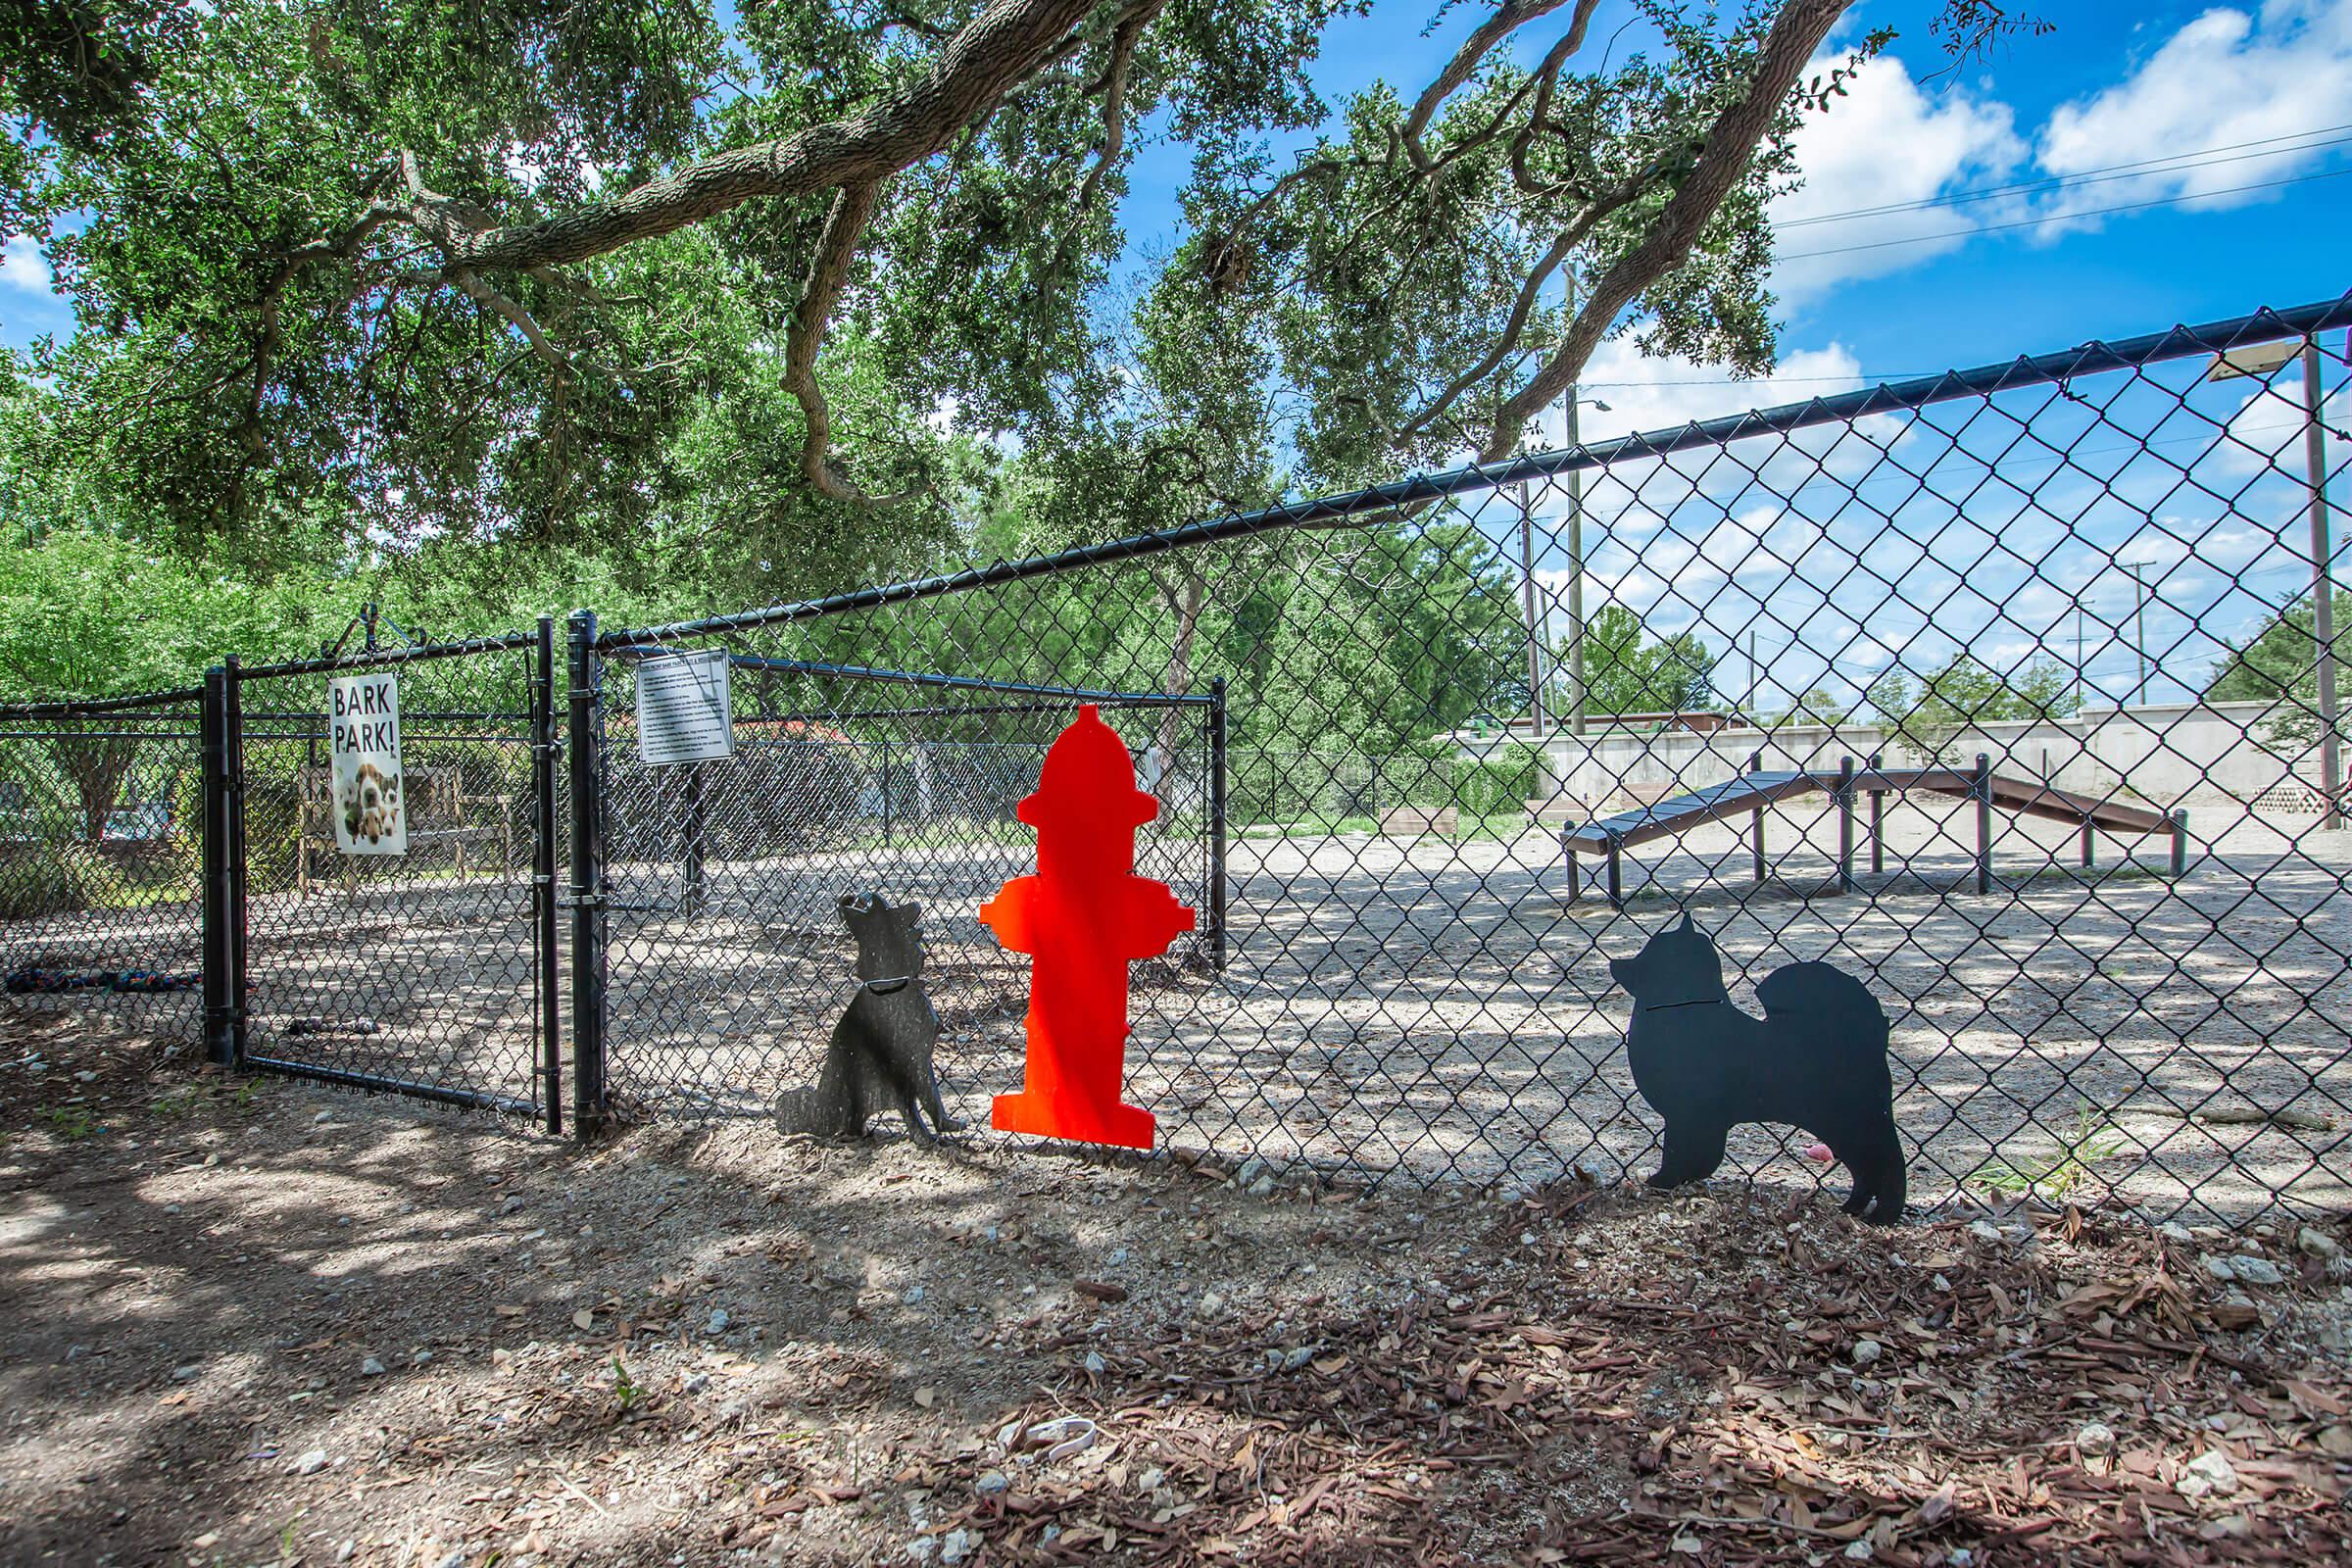 Bring your pets down to the bark park at South Front In Wilmington, North Carolina.